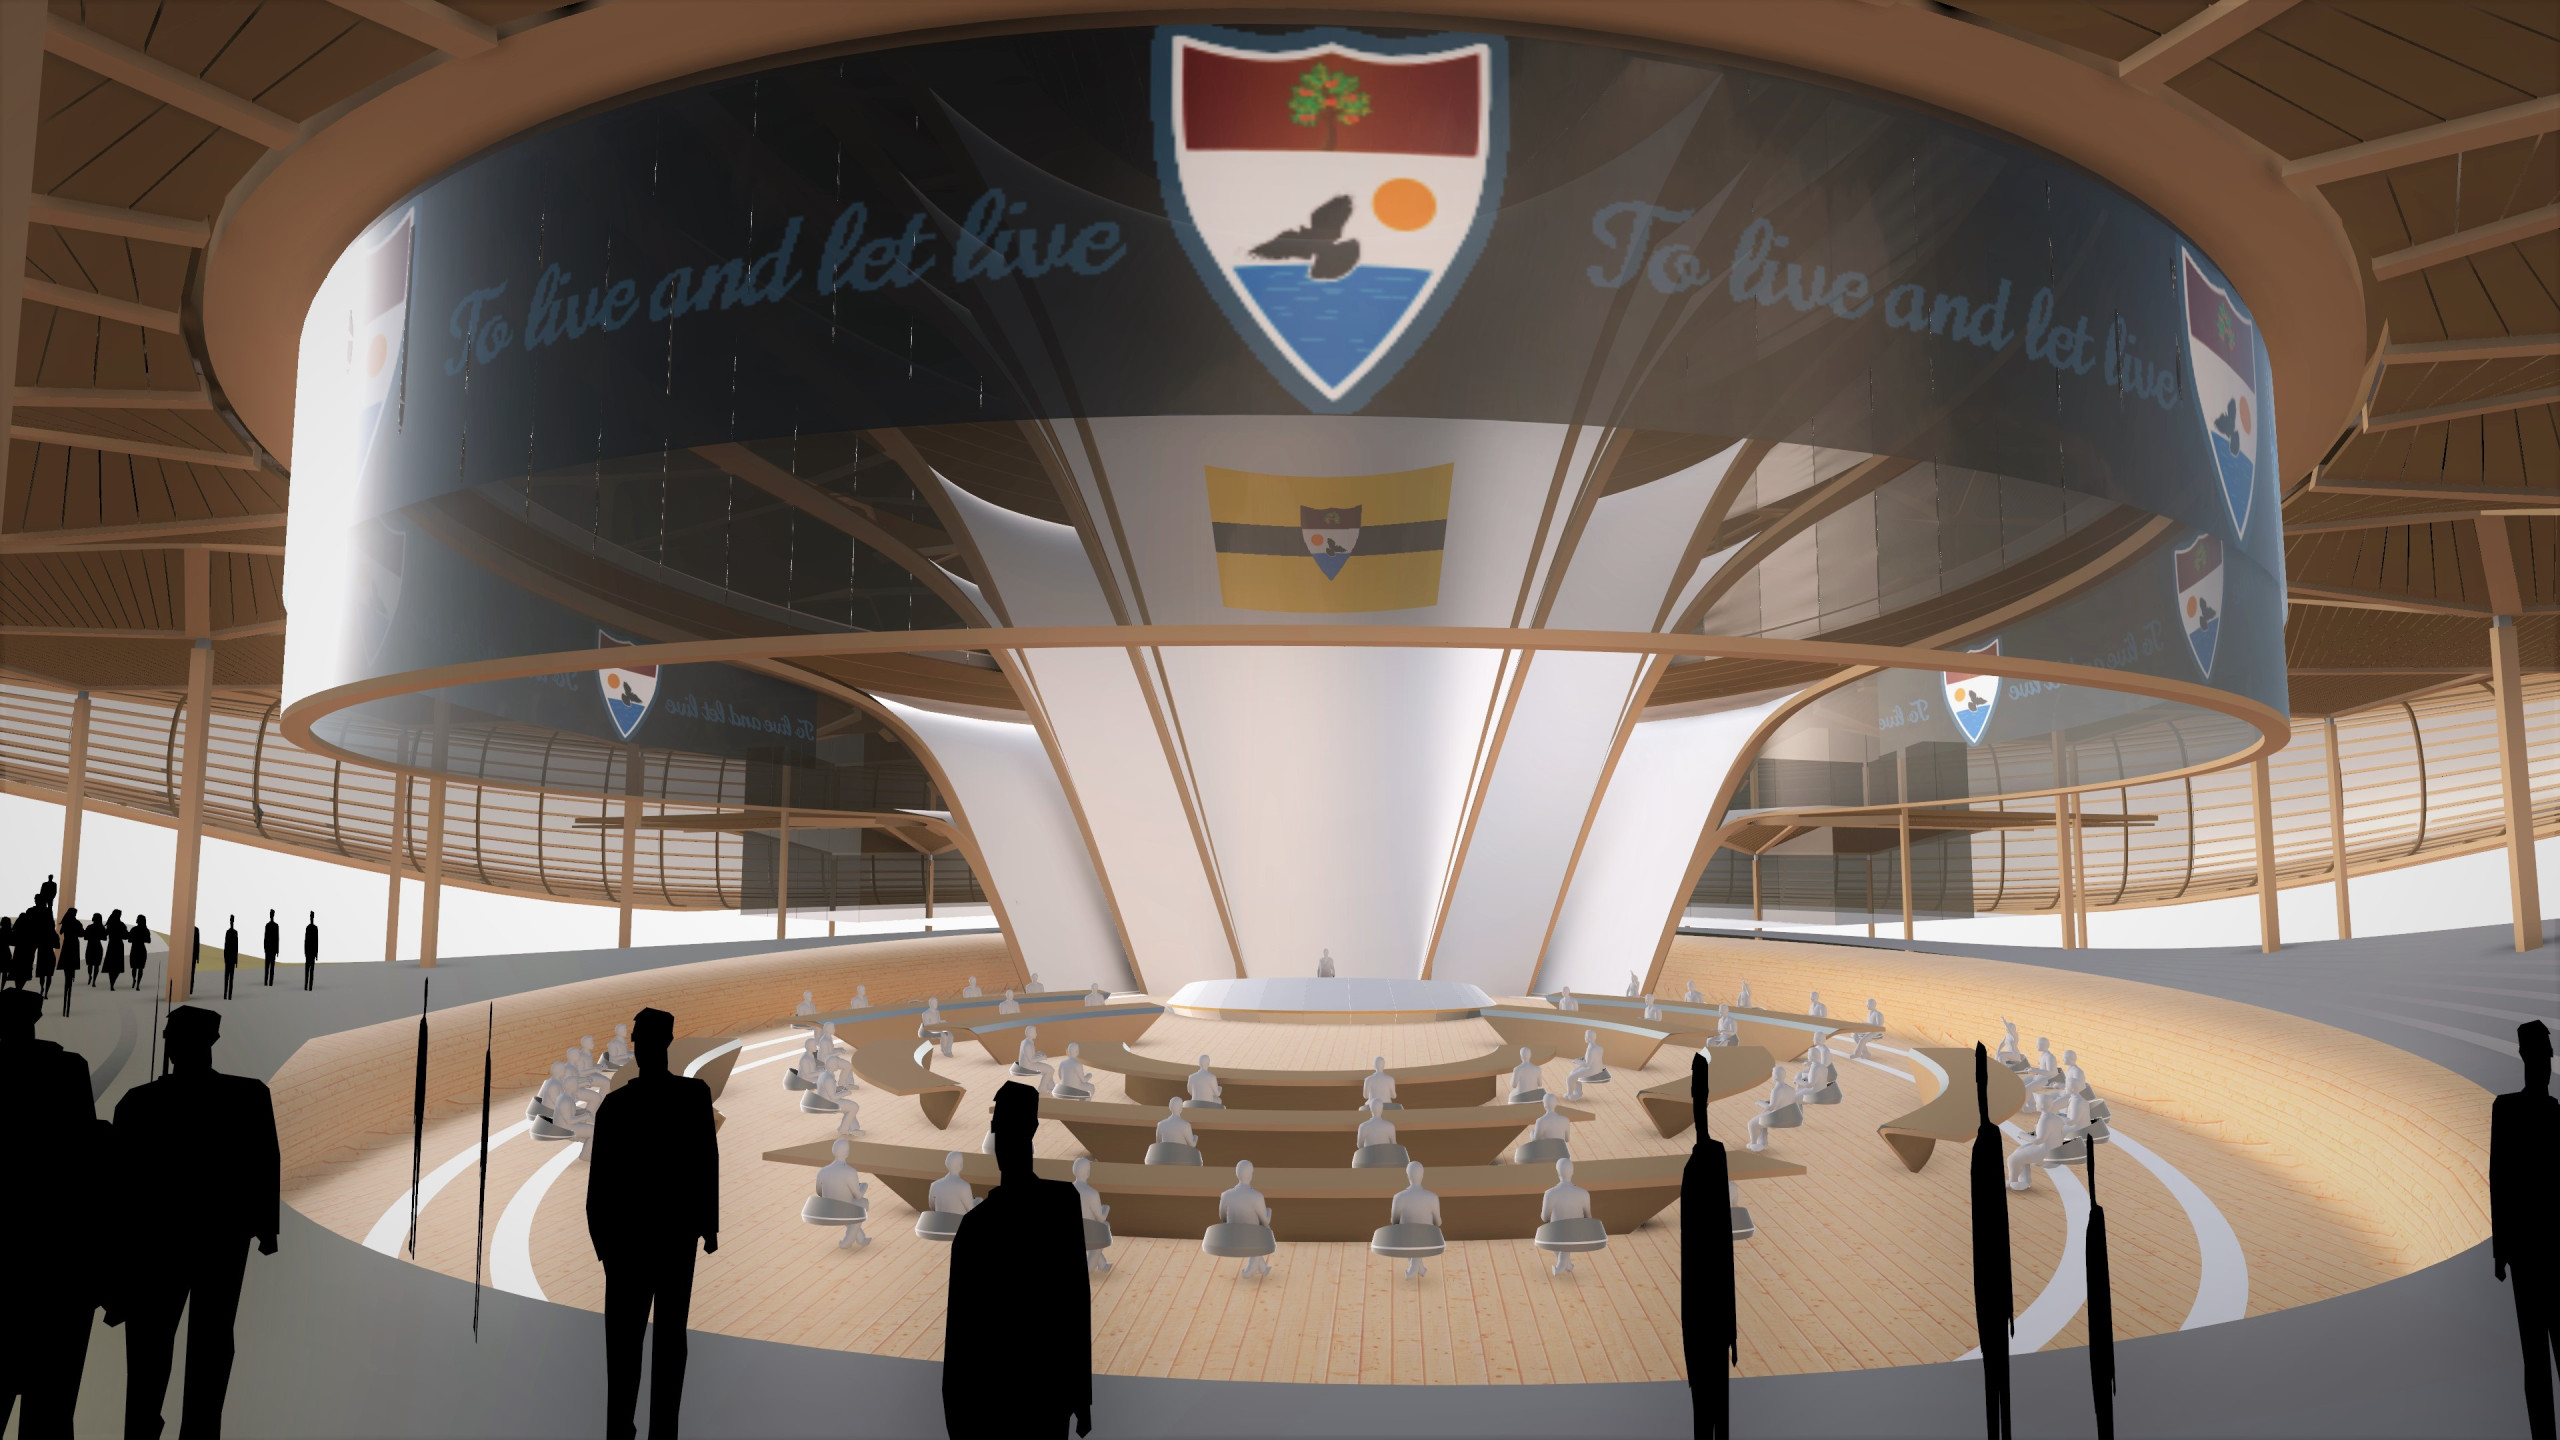 A digital rendering of a circular hall with a central column adorned by the Liberland flag